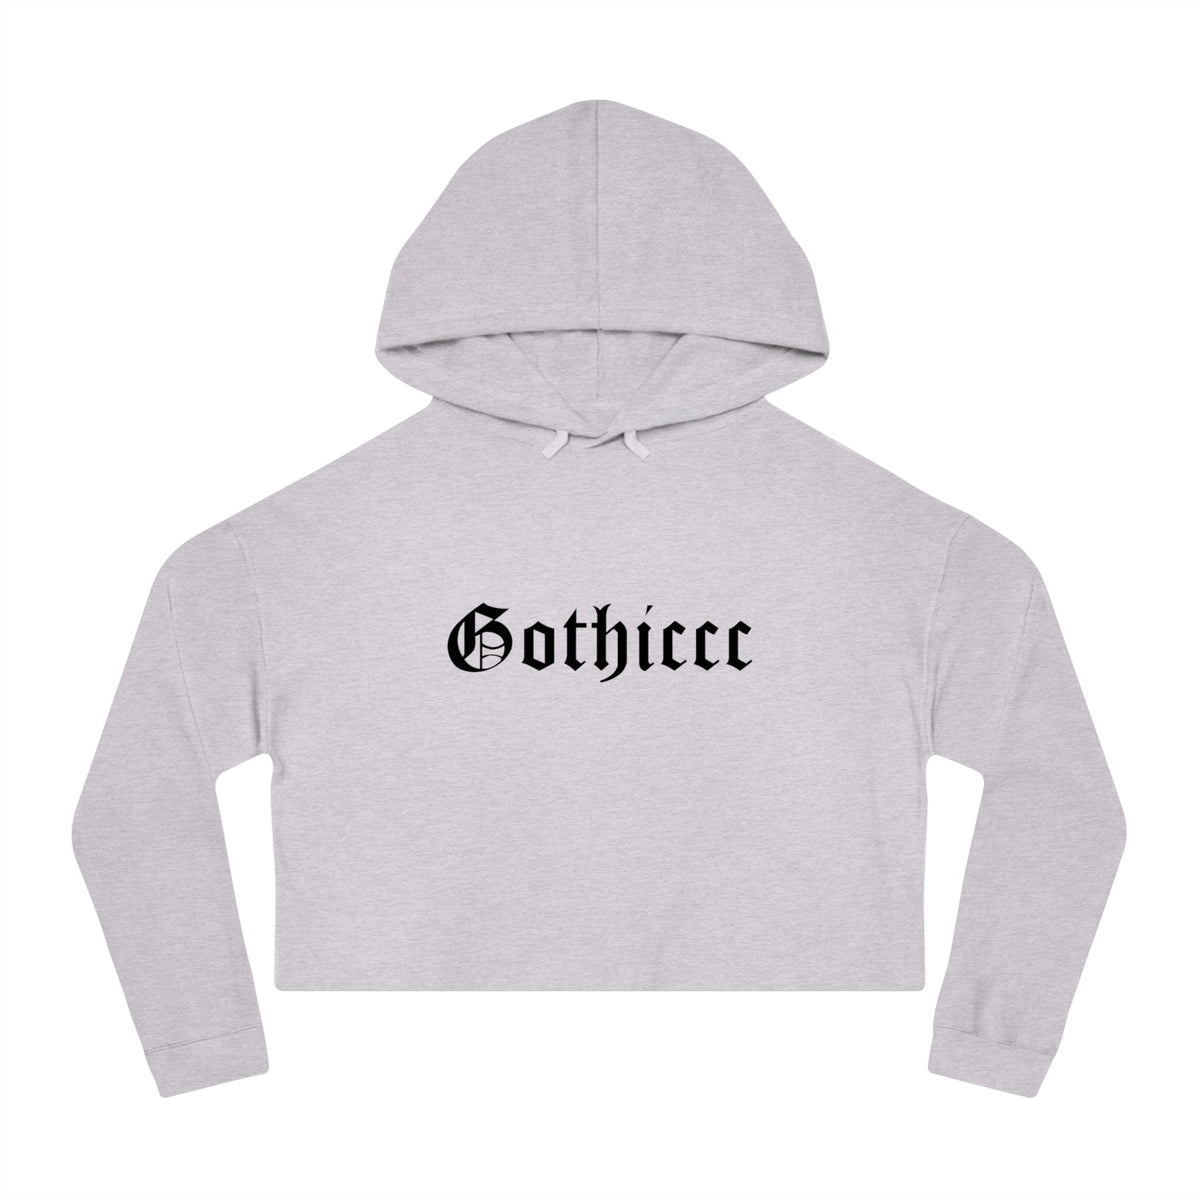 Gothiccc Women’s Cropped Hooded Sweatshirt - Goth Cloth Co.Hoodie19801752780762480790